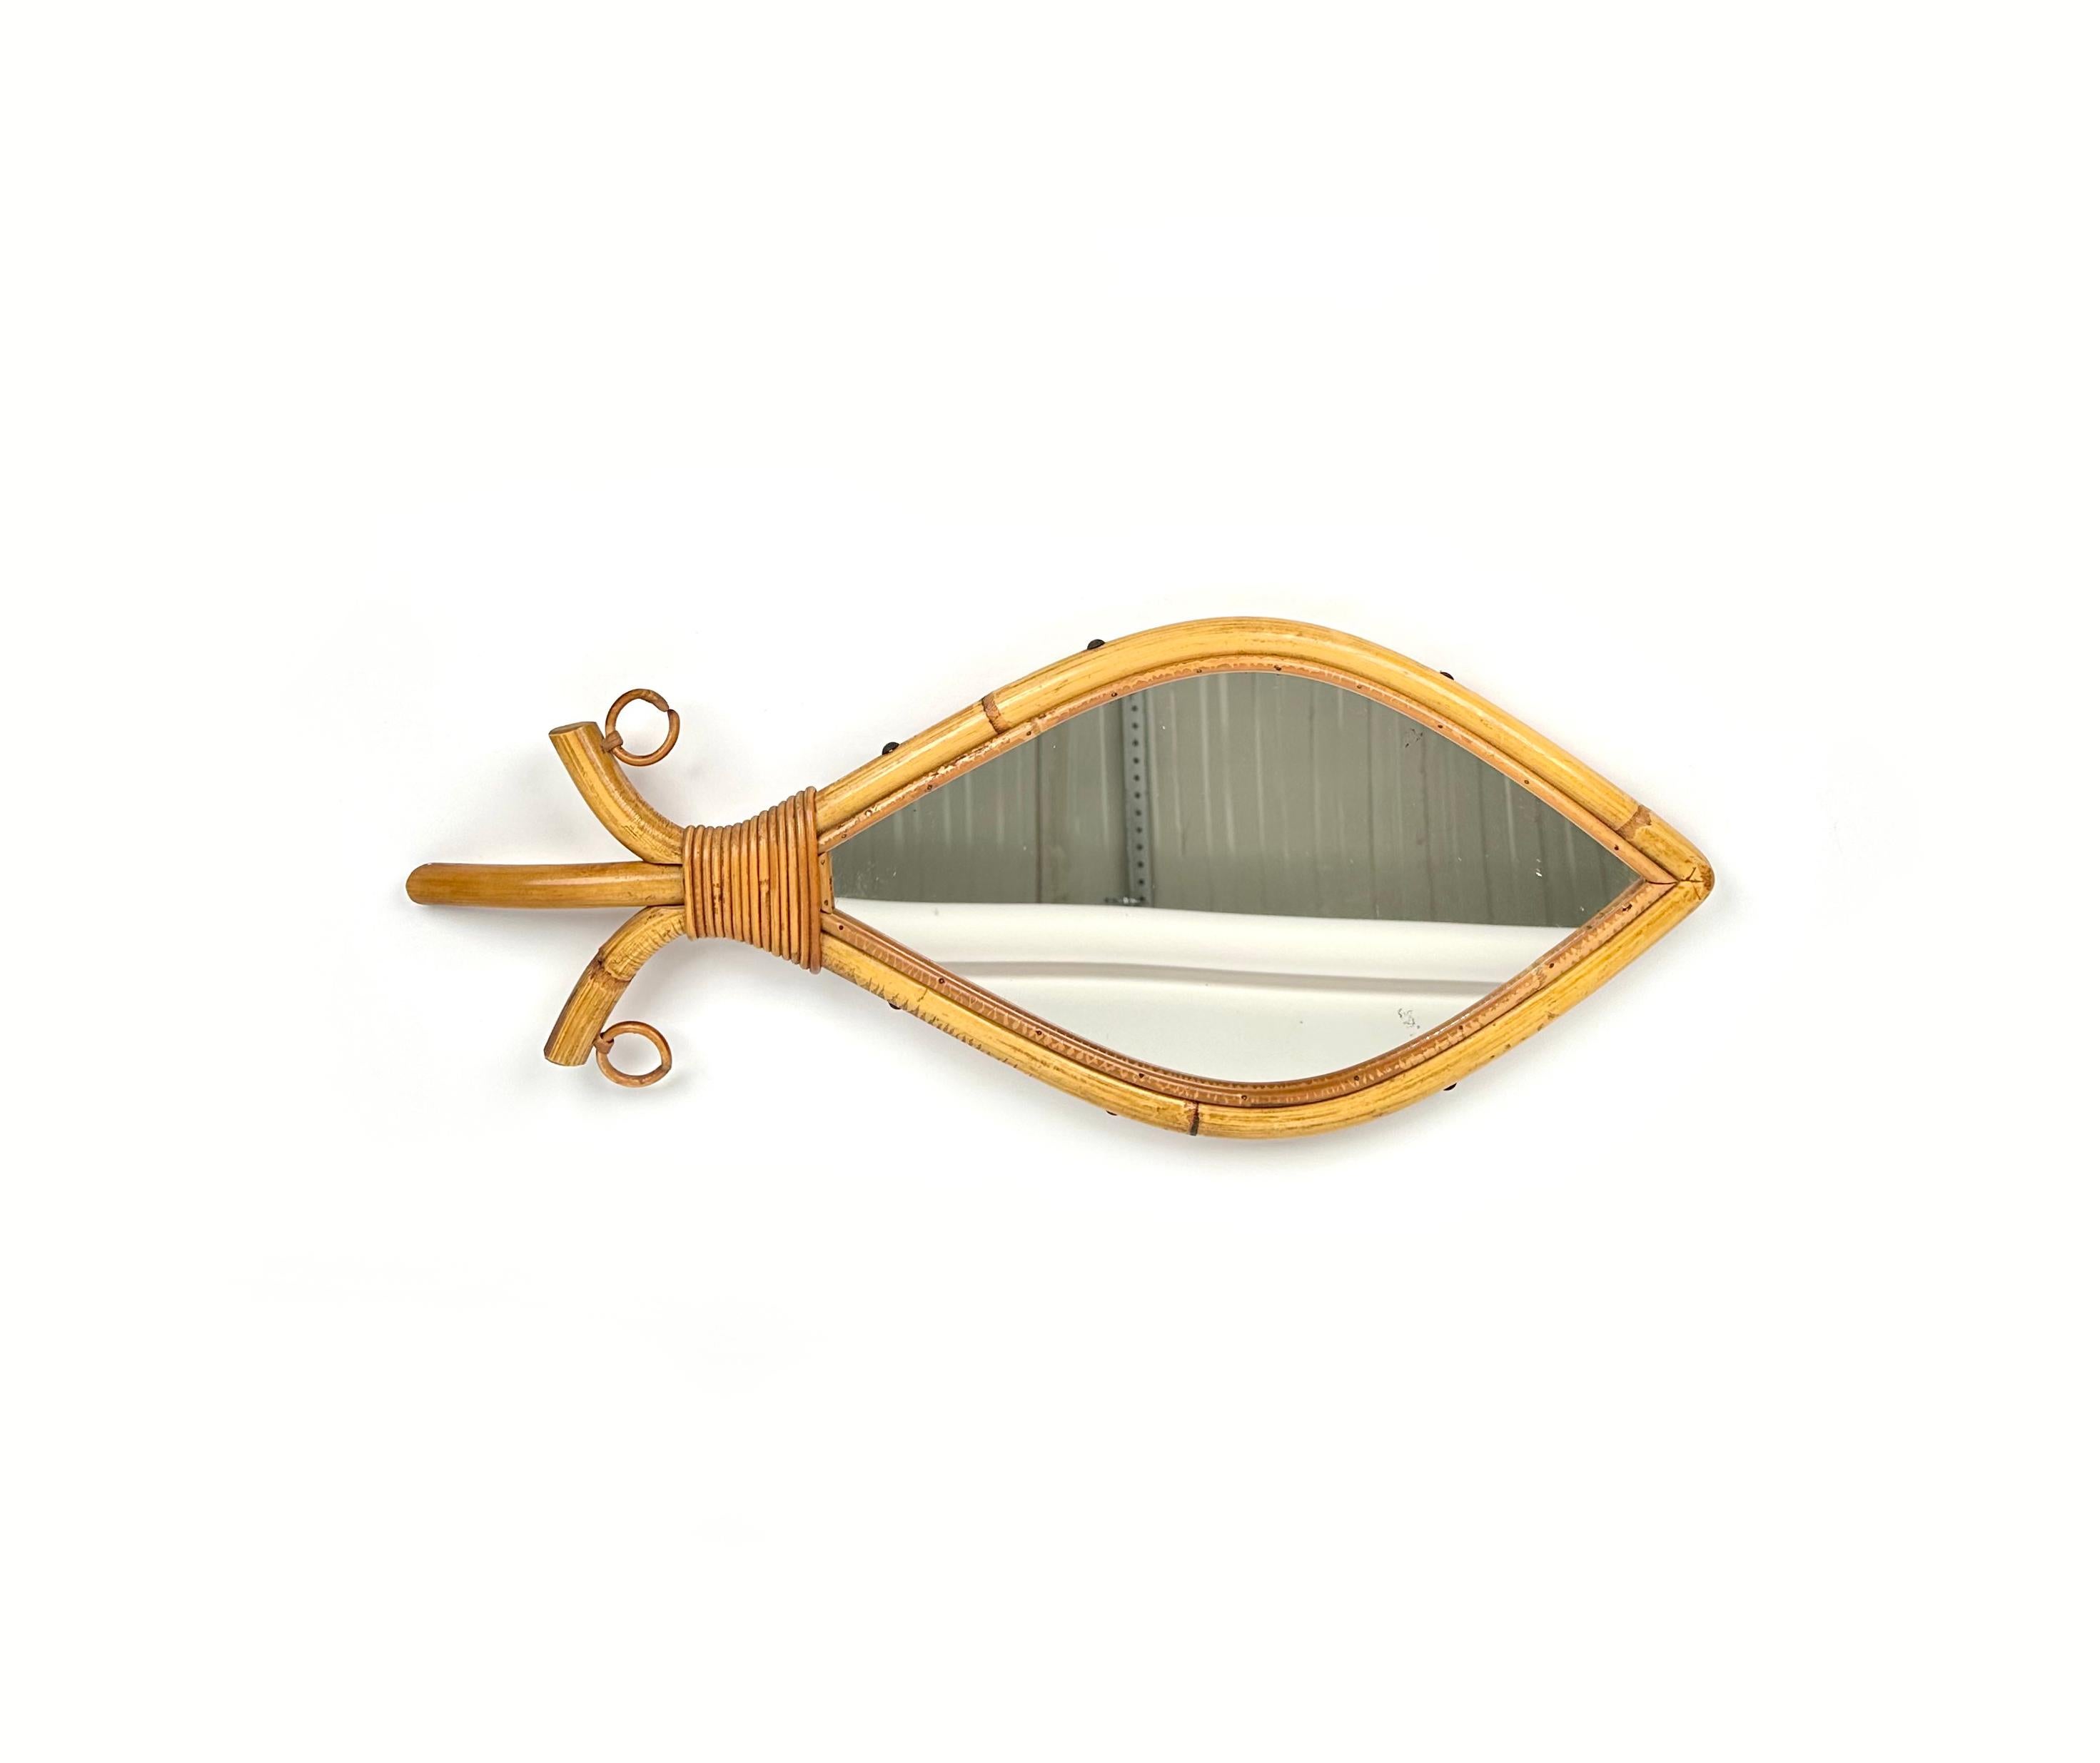 Midcentury beautiful wall mirror fish shaped in bamboo and rattan.

Made in Italy in the 1960s.